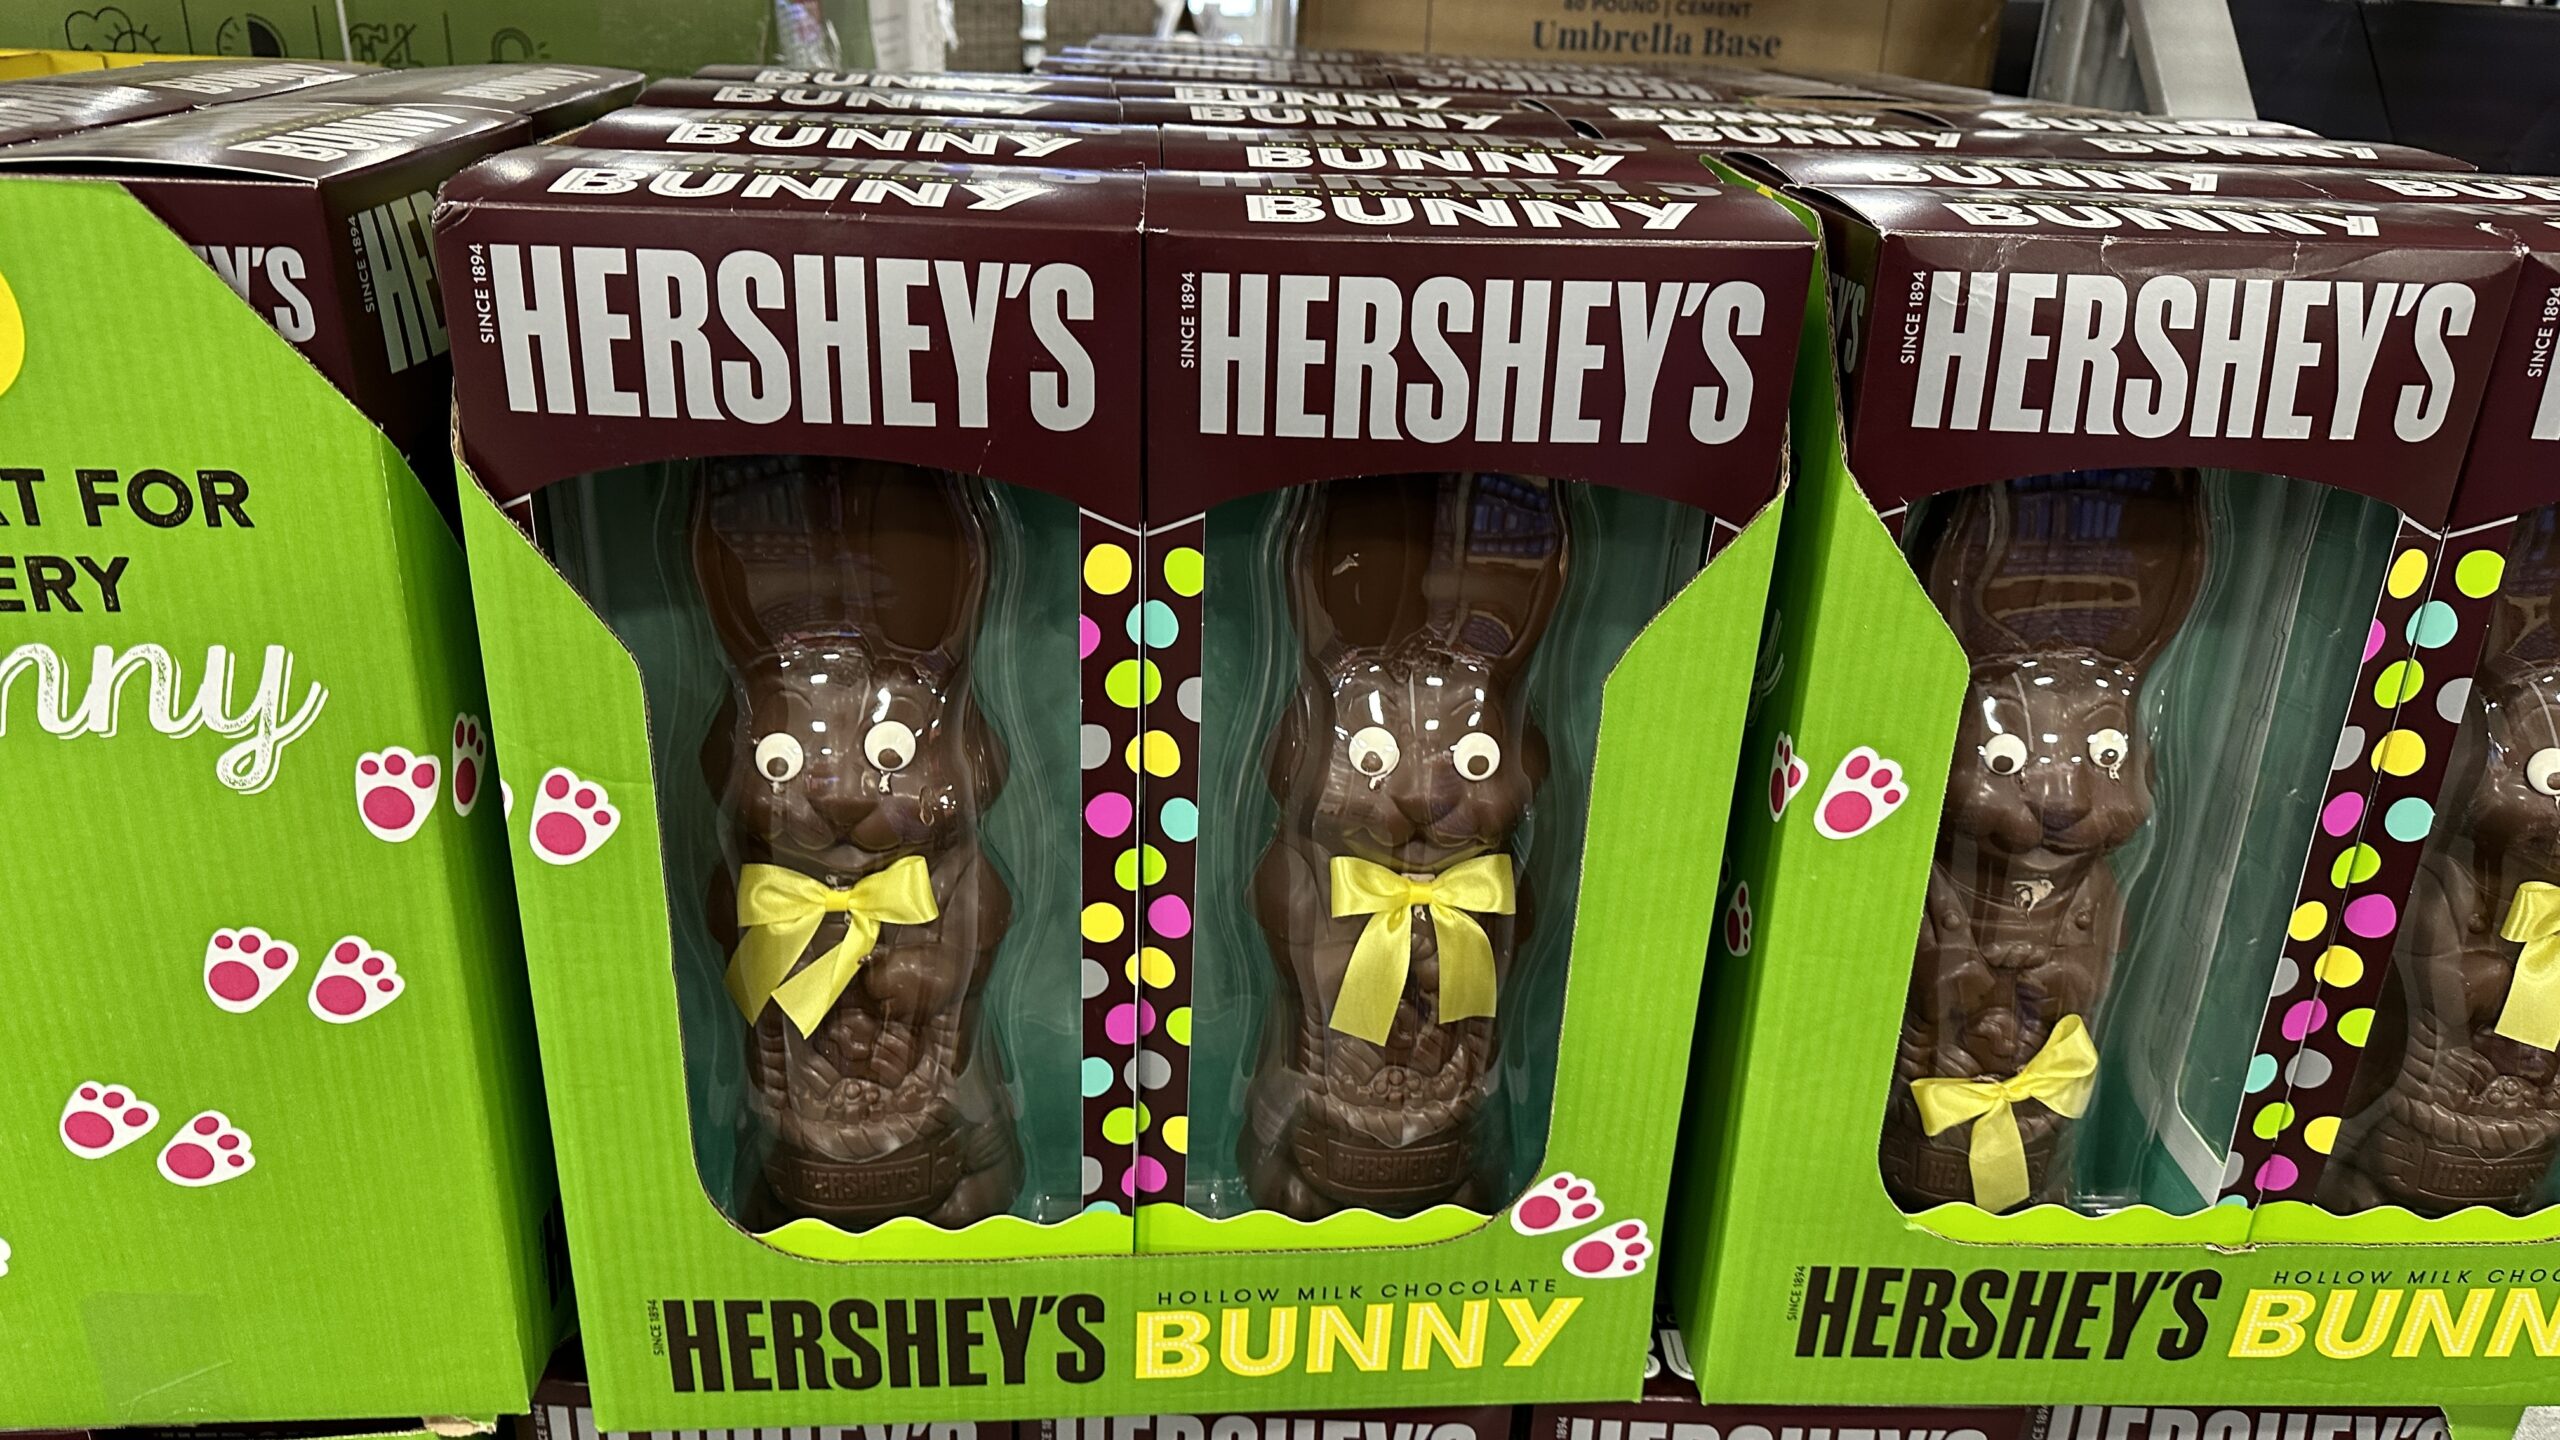 Sam’s Club is Selling A 1-Pound Hershey’s Chocolate Bunny Just in Time for Easter